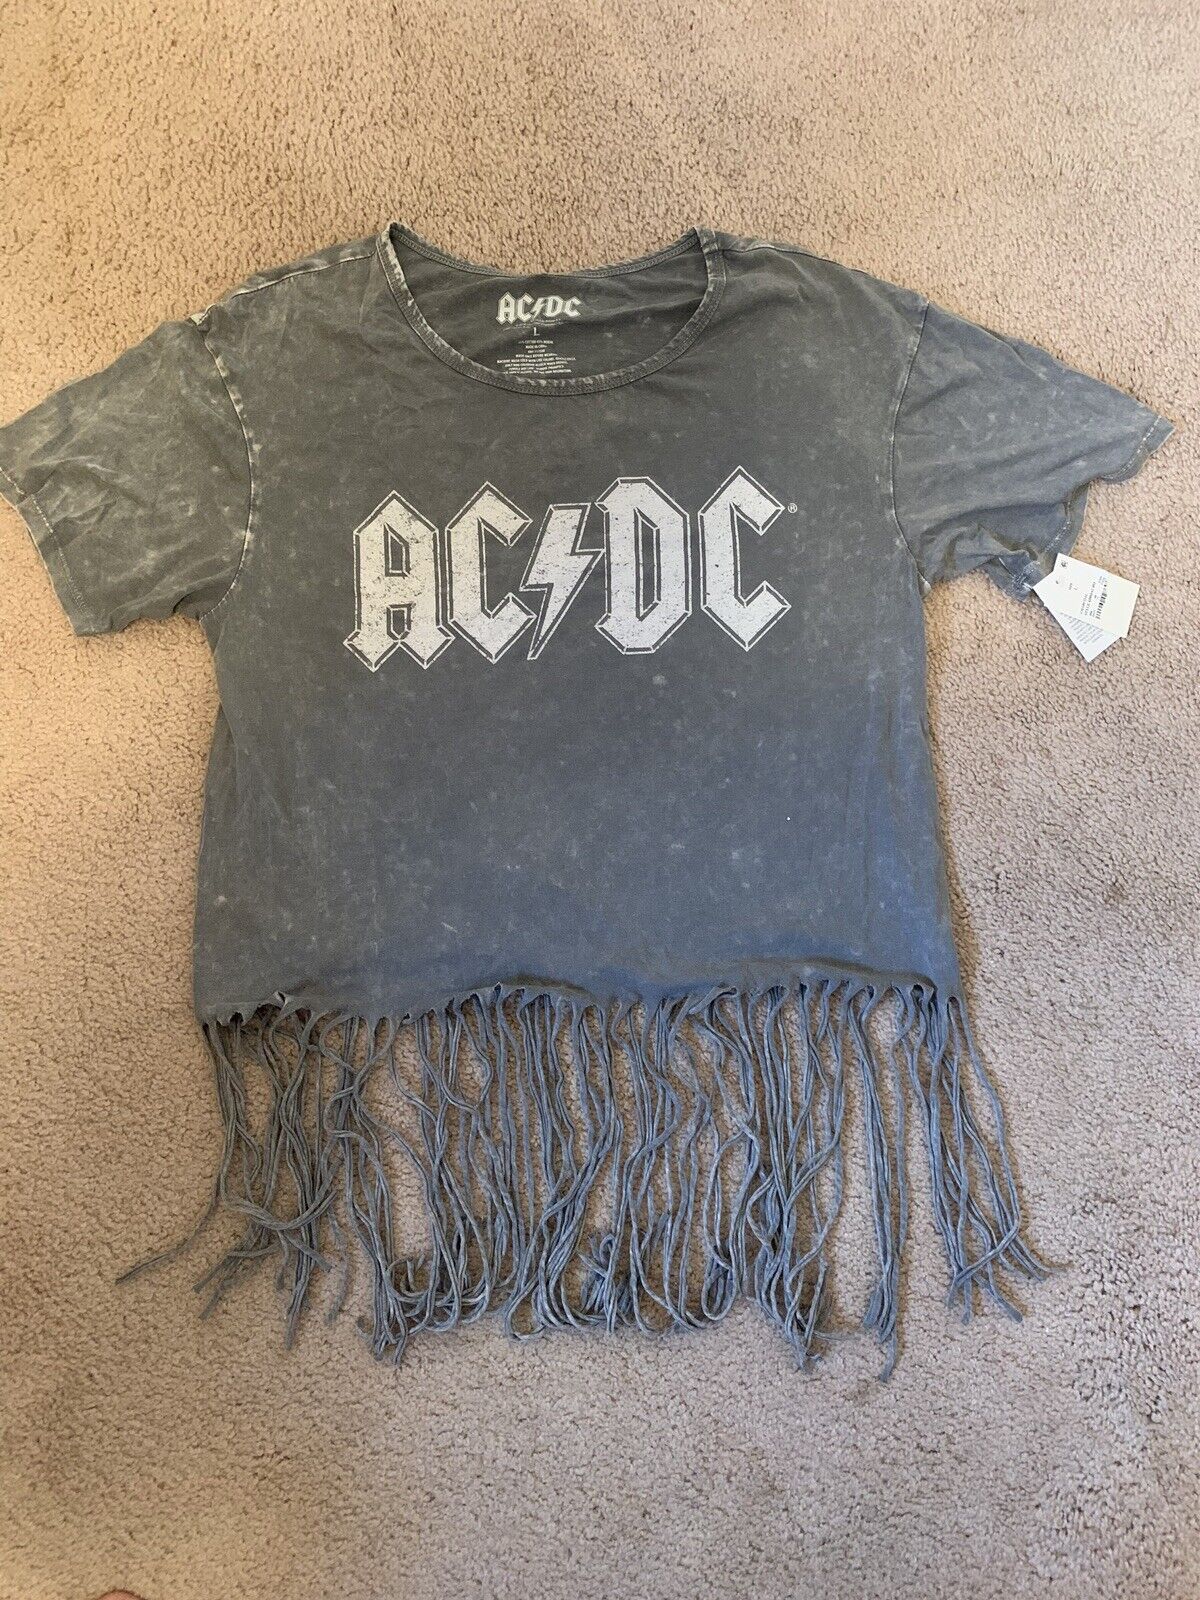 Acdc Fringed Stretch Shirt/top Sz Lg. New With Tags Women’s , Fringed .vintage